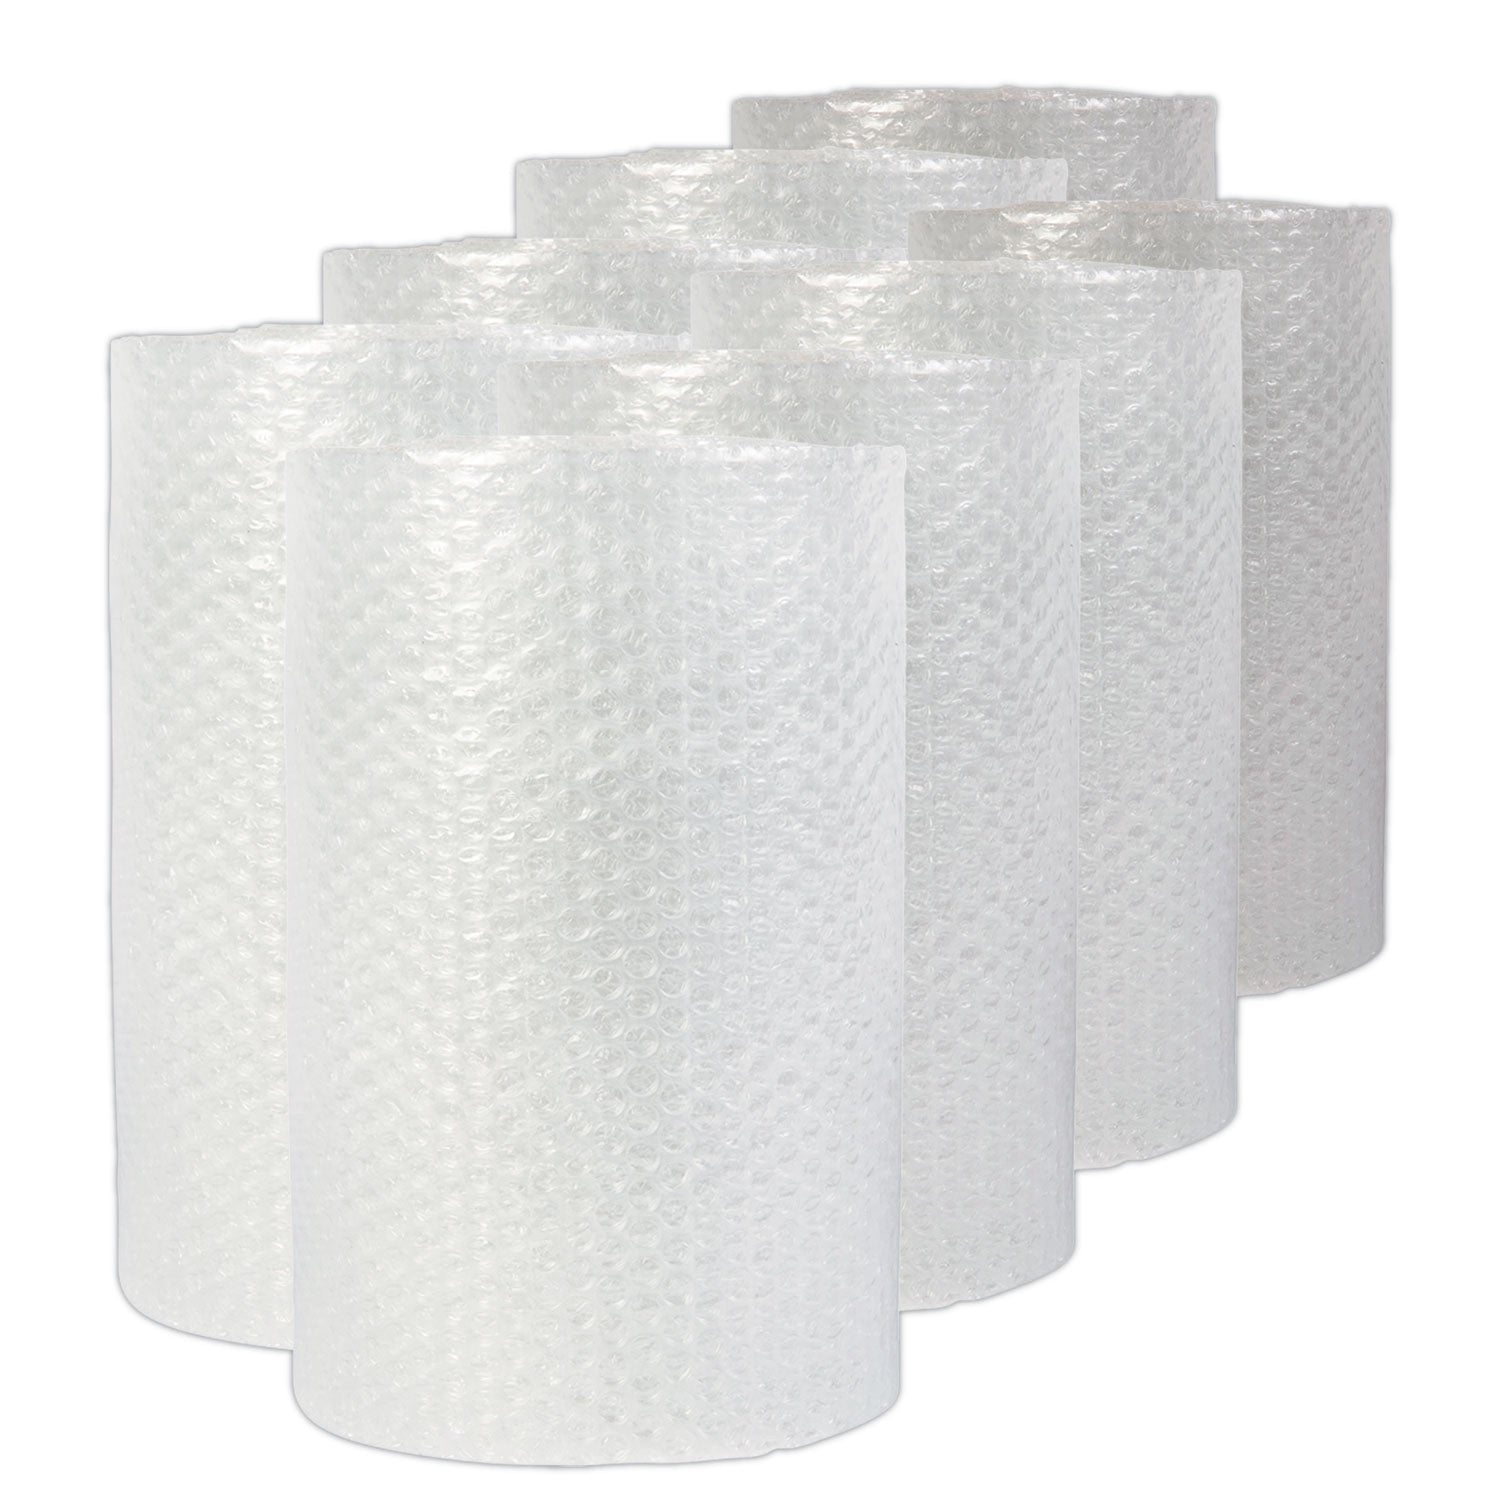 bubble-packaging-019-thick-12-x-200-ft-perforated-every-12-clear-8-carton_unv4087906 - 1